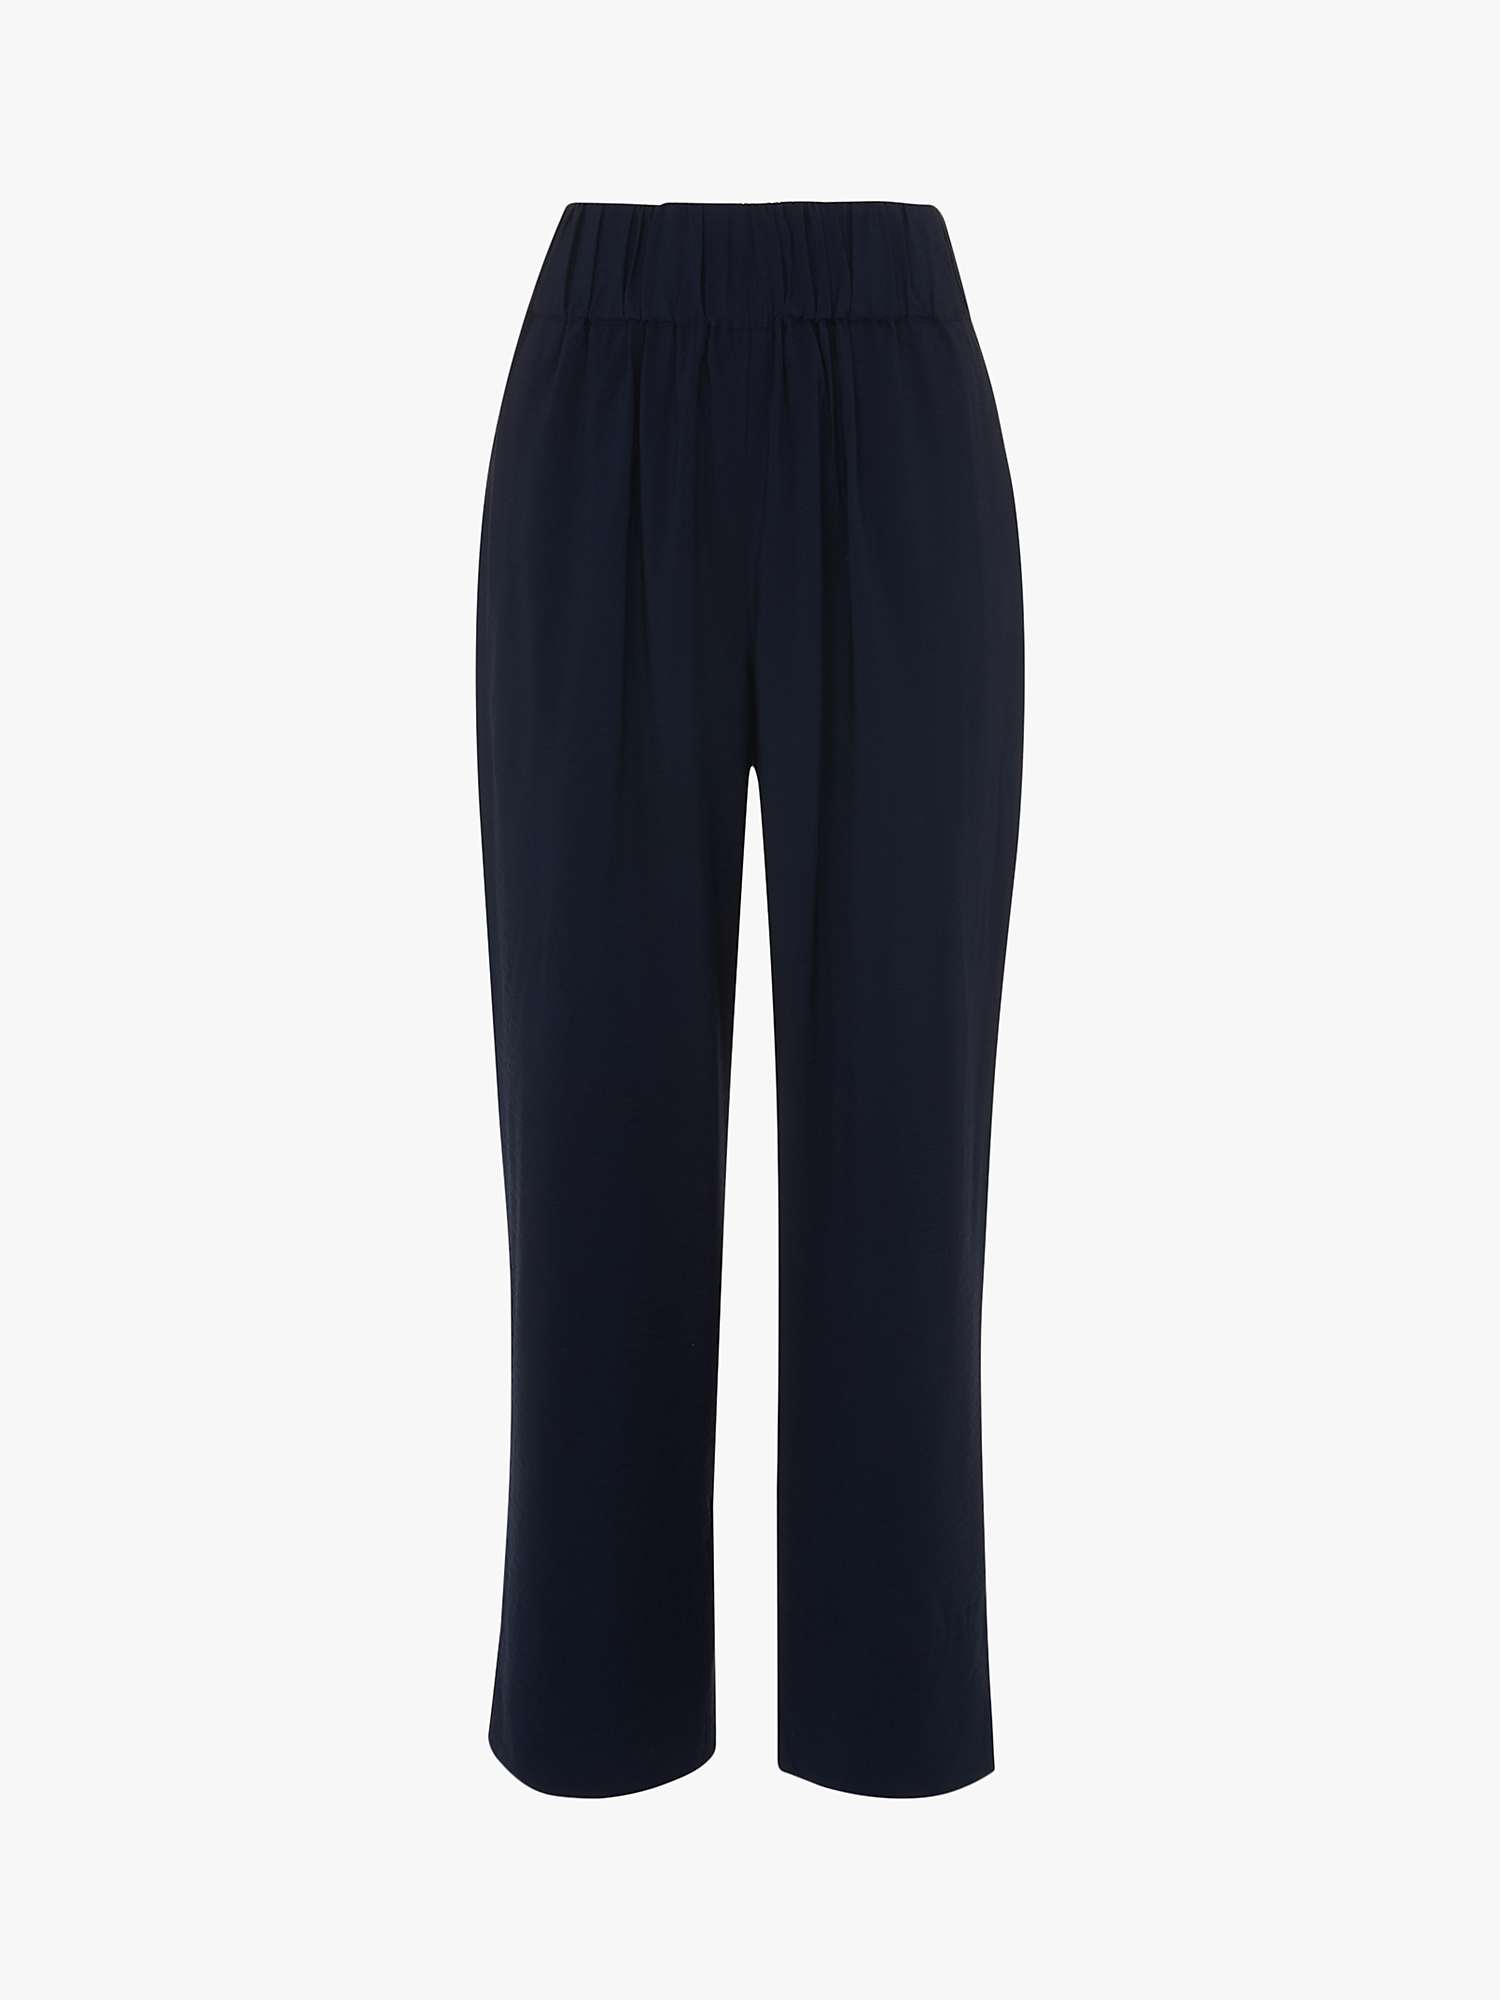 Whistles Cropped Nicola Elasticated Trousers, Navy at John Lewis & Partners